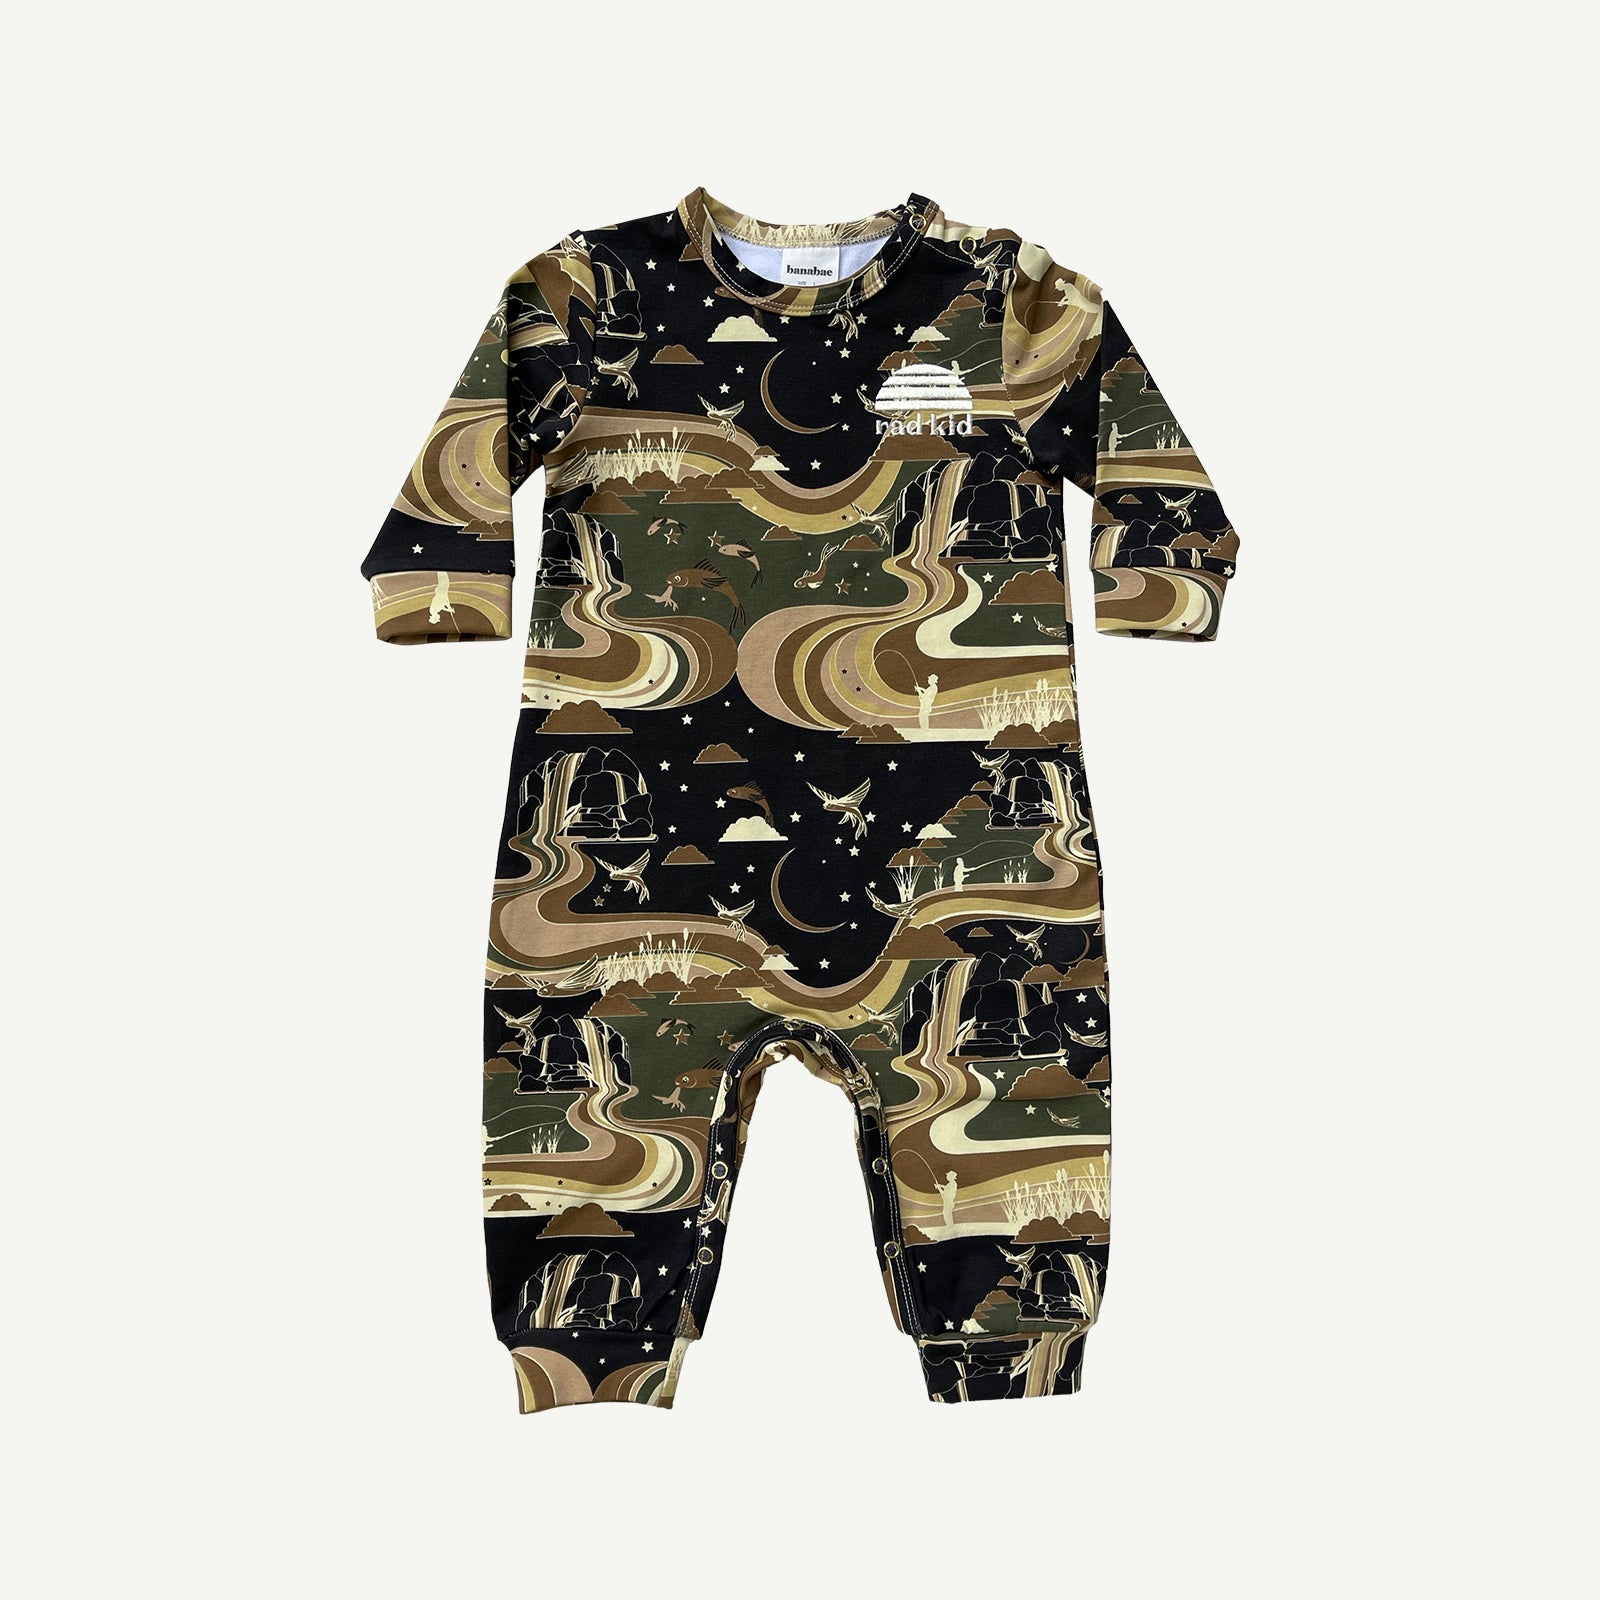 Fishing for Dreams Organic Cotton Jumpsuit